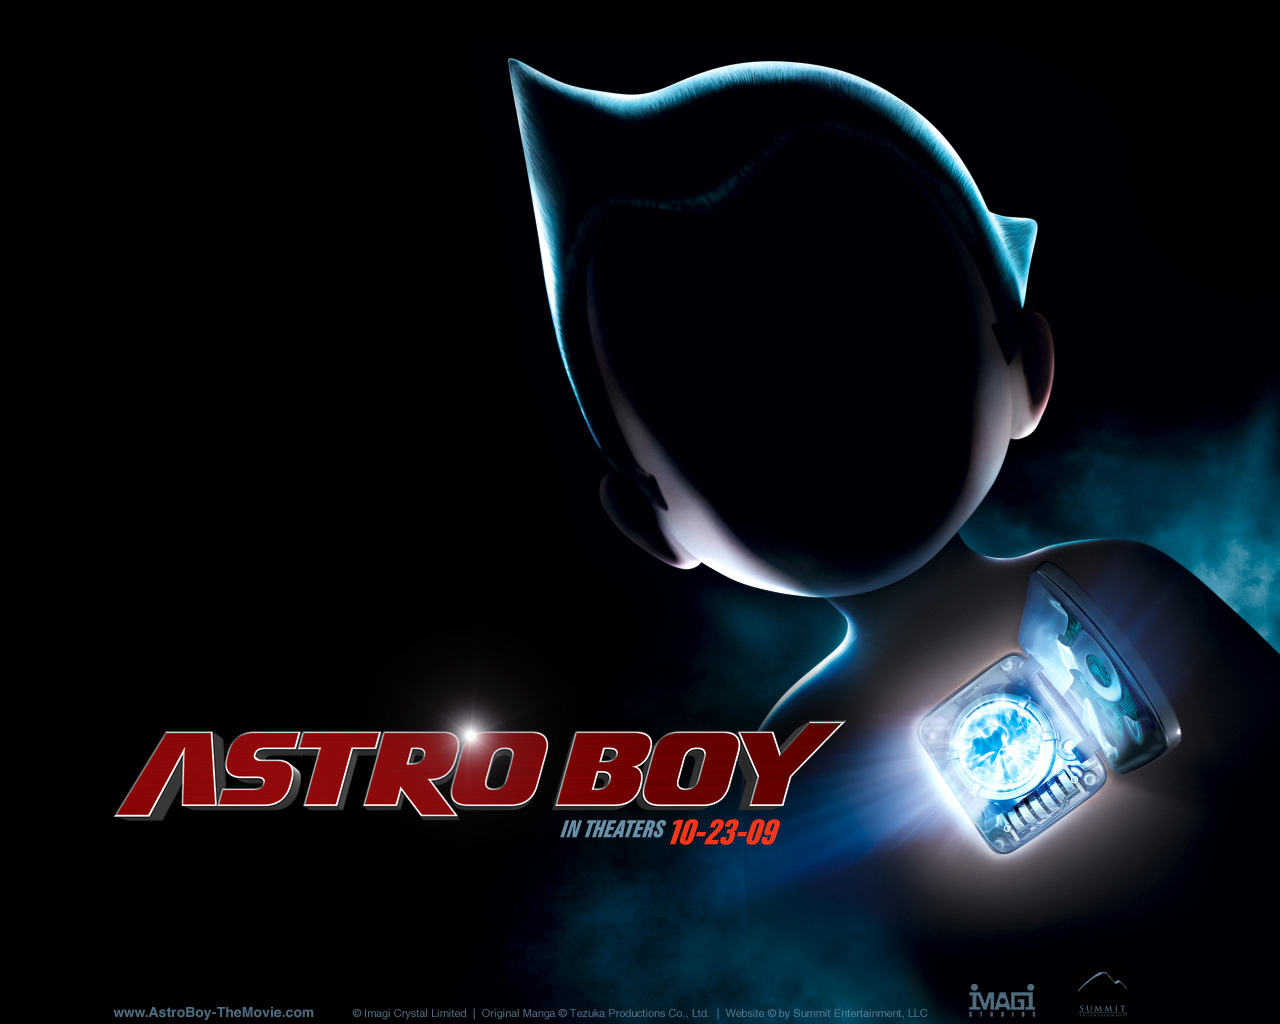 Download this Astro Boy Wallpaper picture